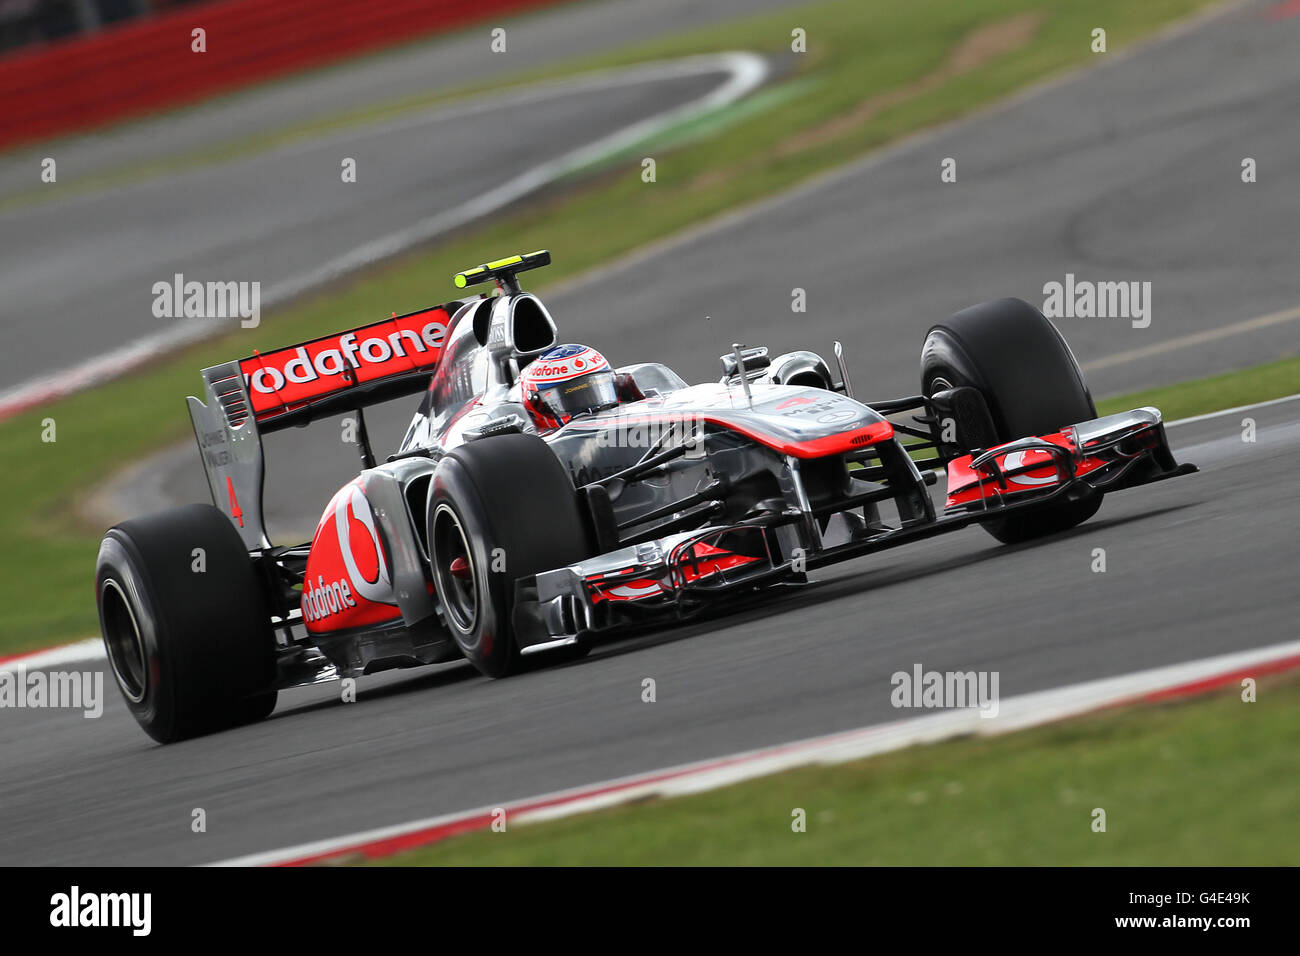 McLaren Mercedes' Jenson Button during Qualifying day for the Formula One Santander British Grand Prix at Silverstone Circuit, Northampton. Stock Photo